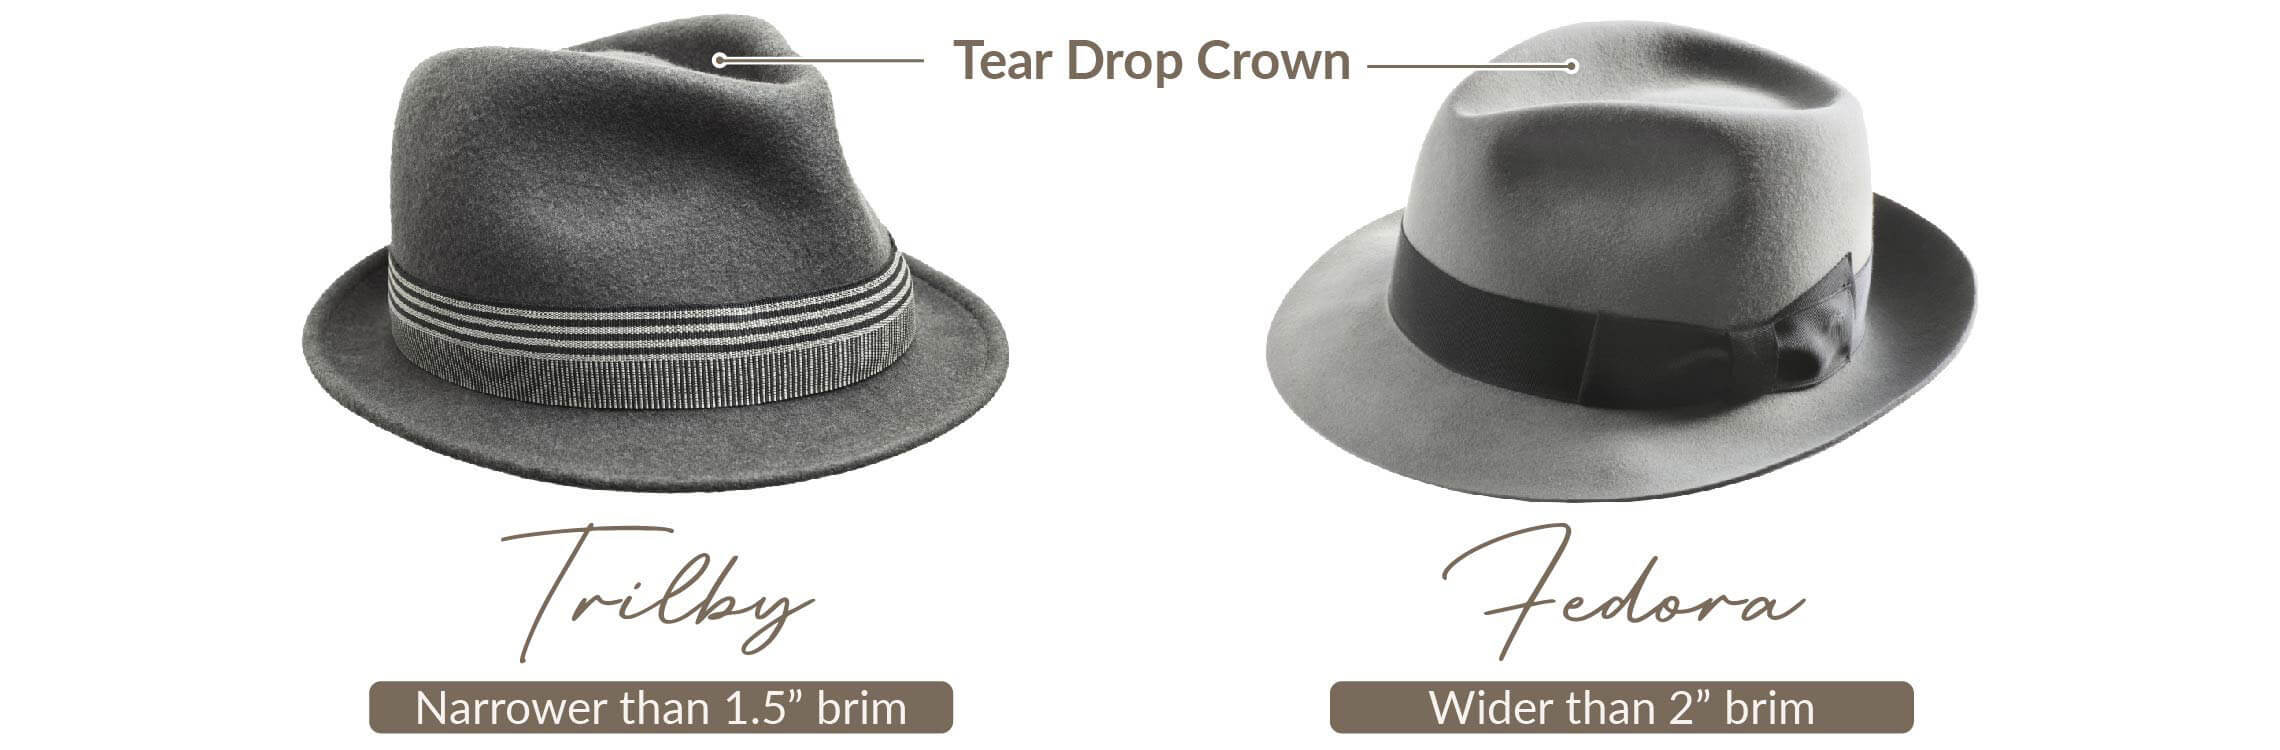 Trilby vs Fedora: What's the Difference? – American Hat Makers